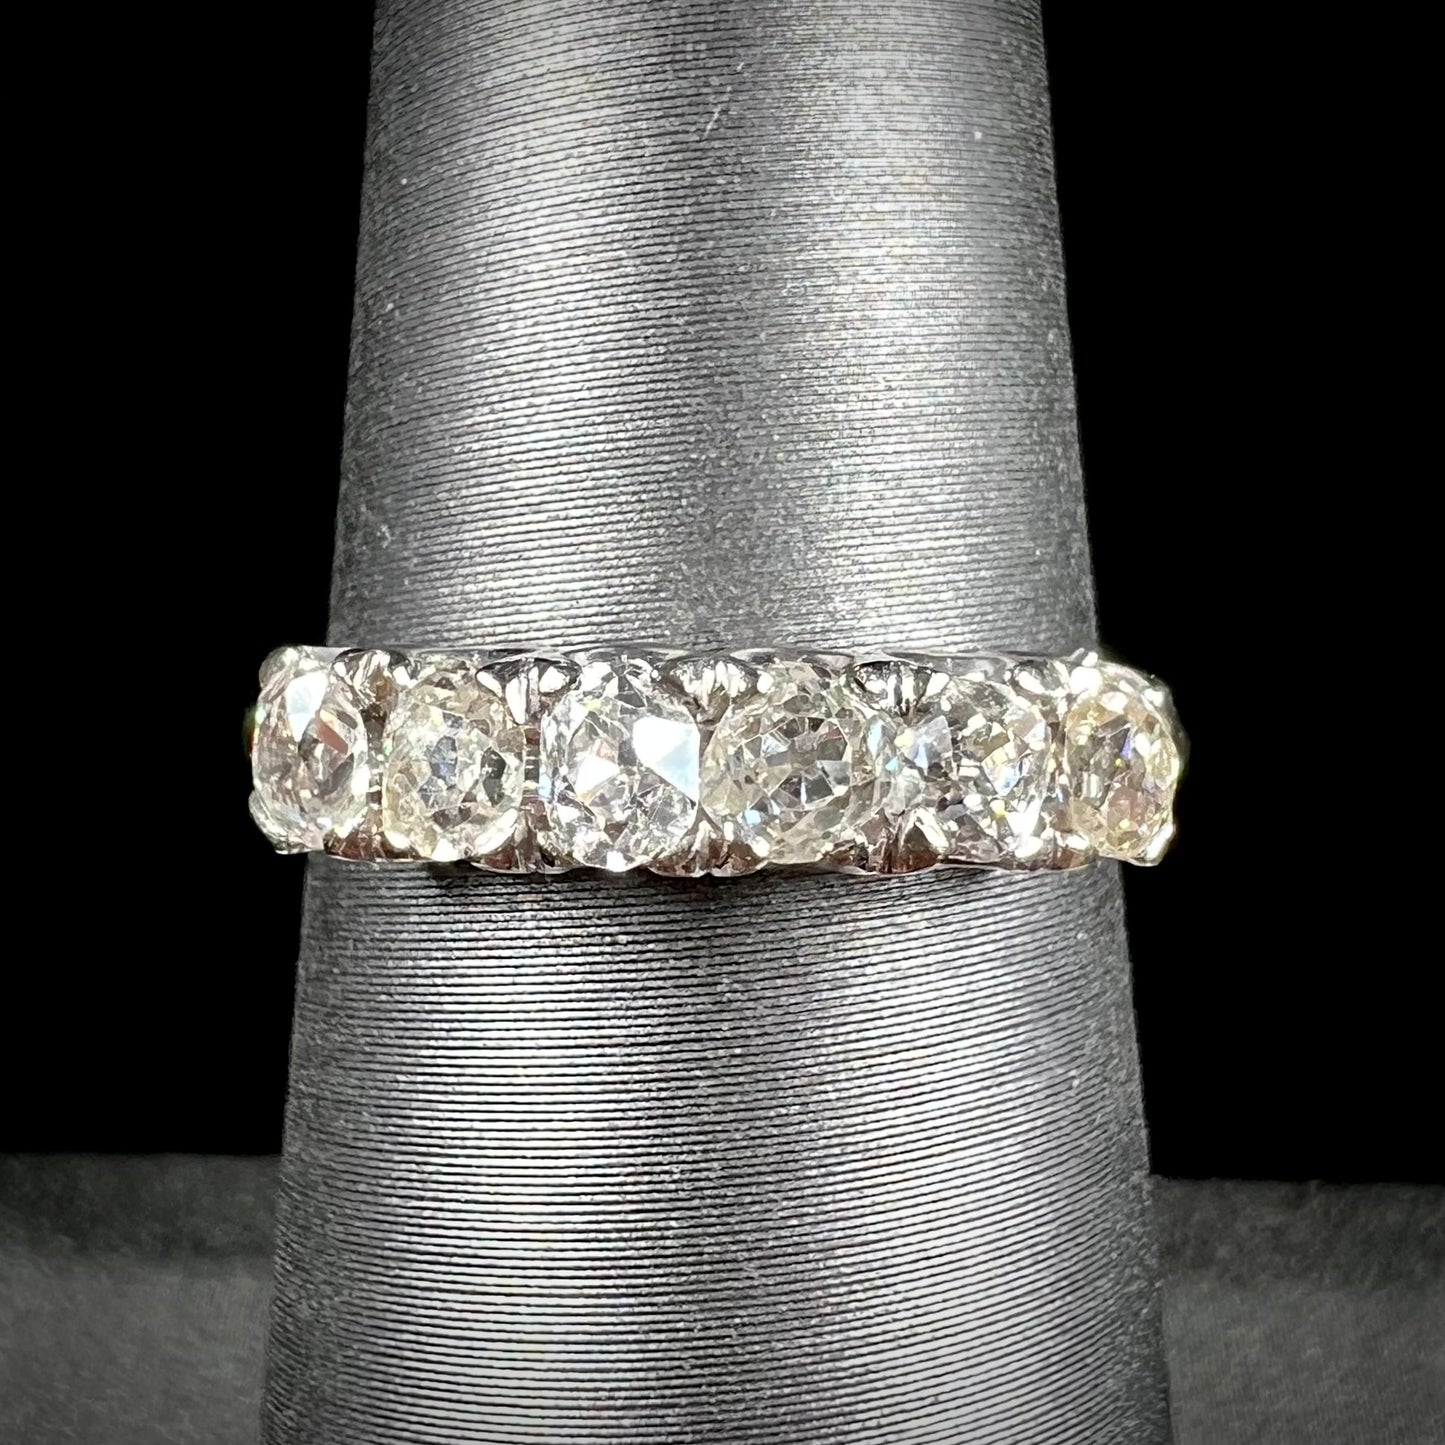 An antique white gold diamond wedding band set with six old mine cut natural diamonds.